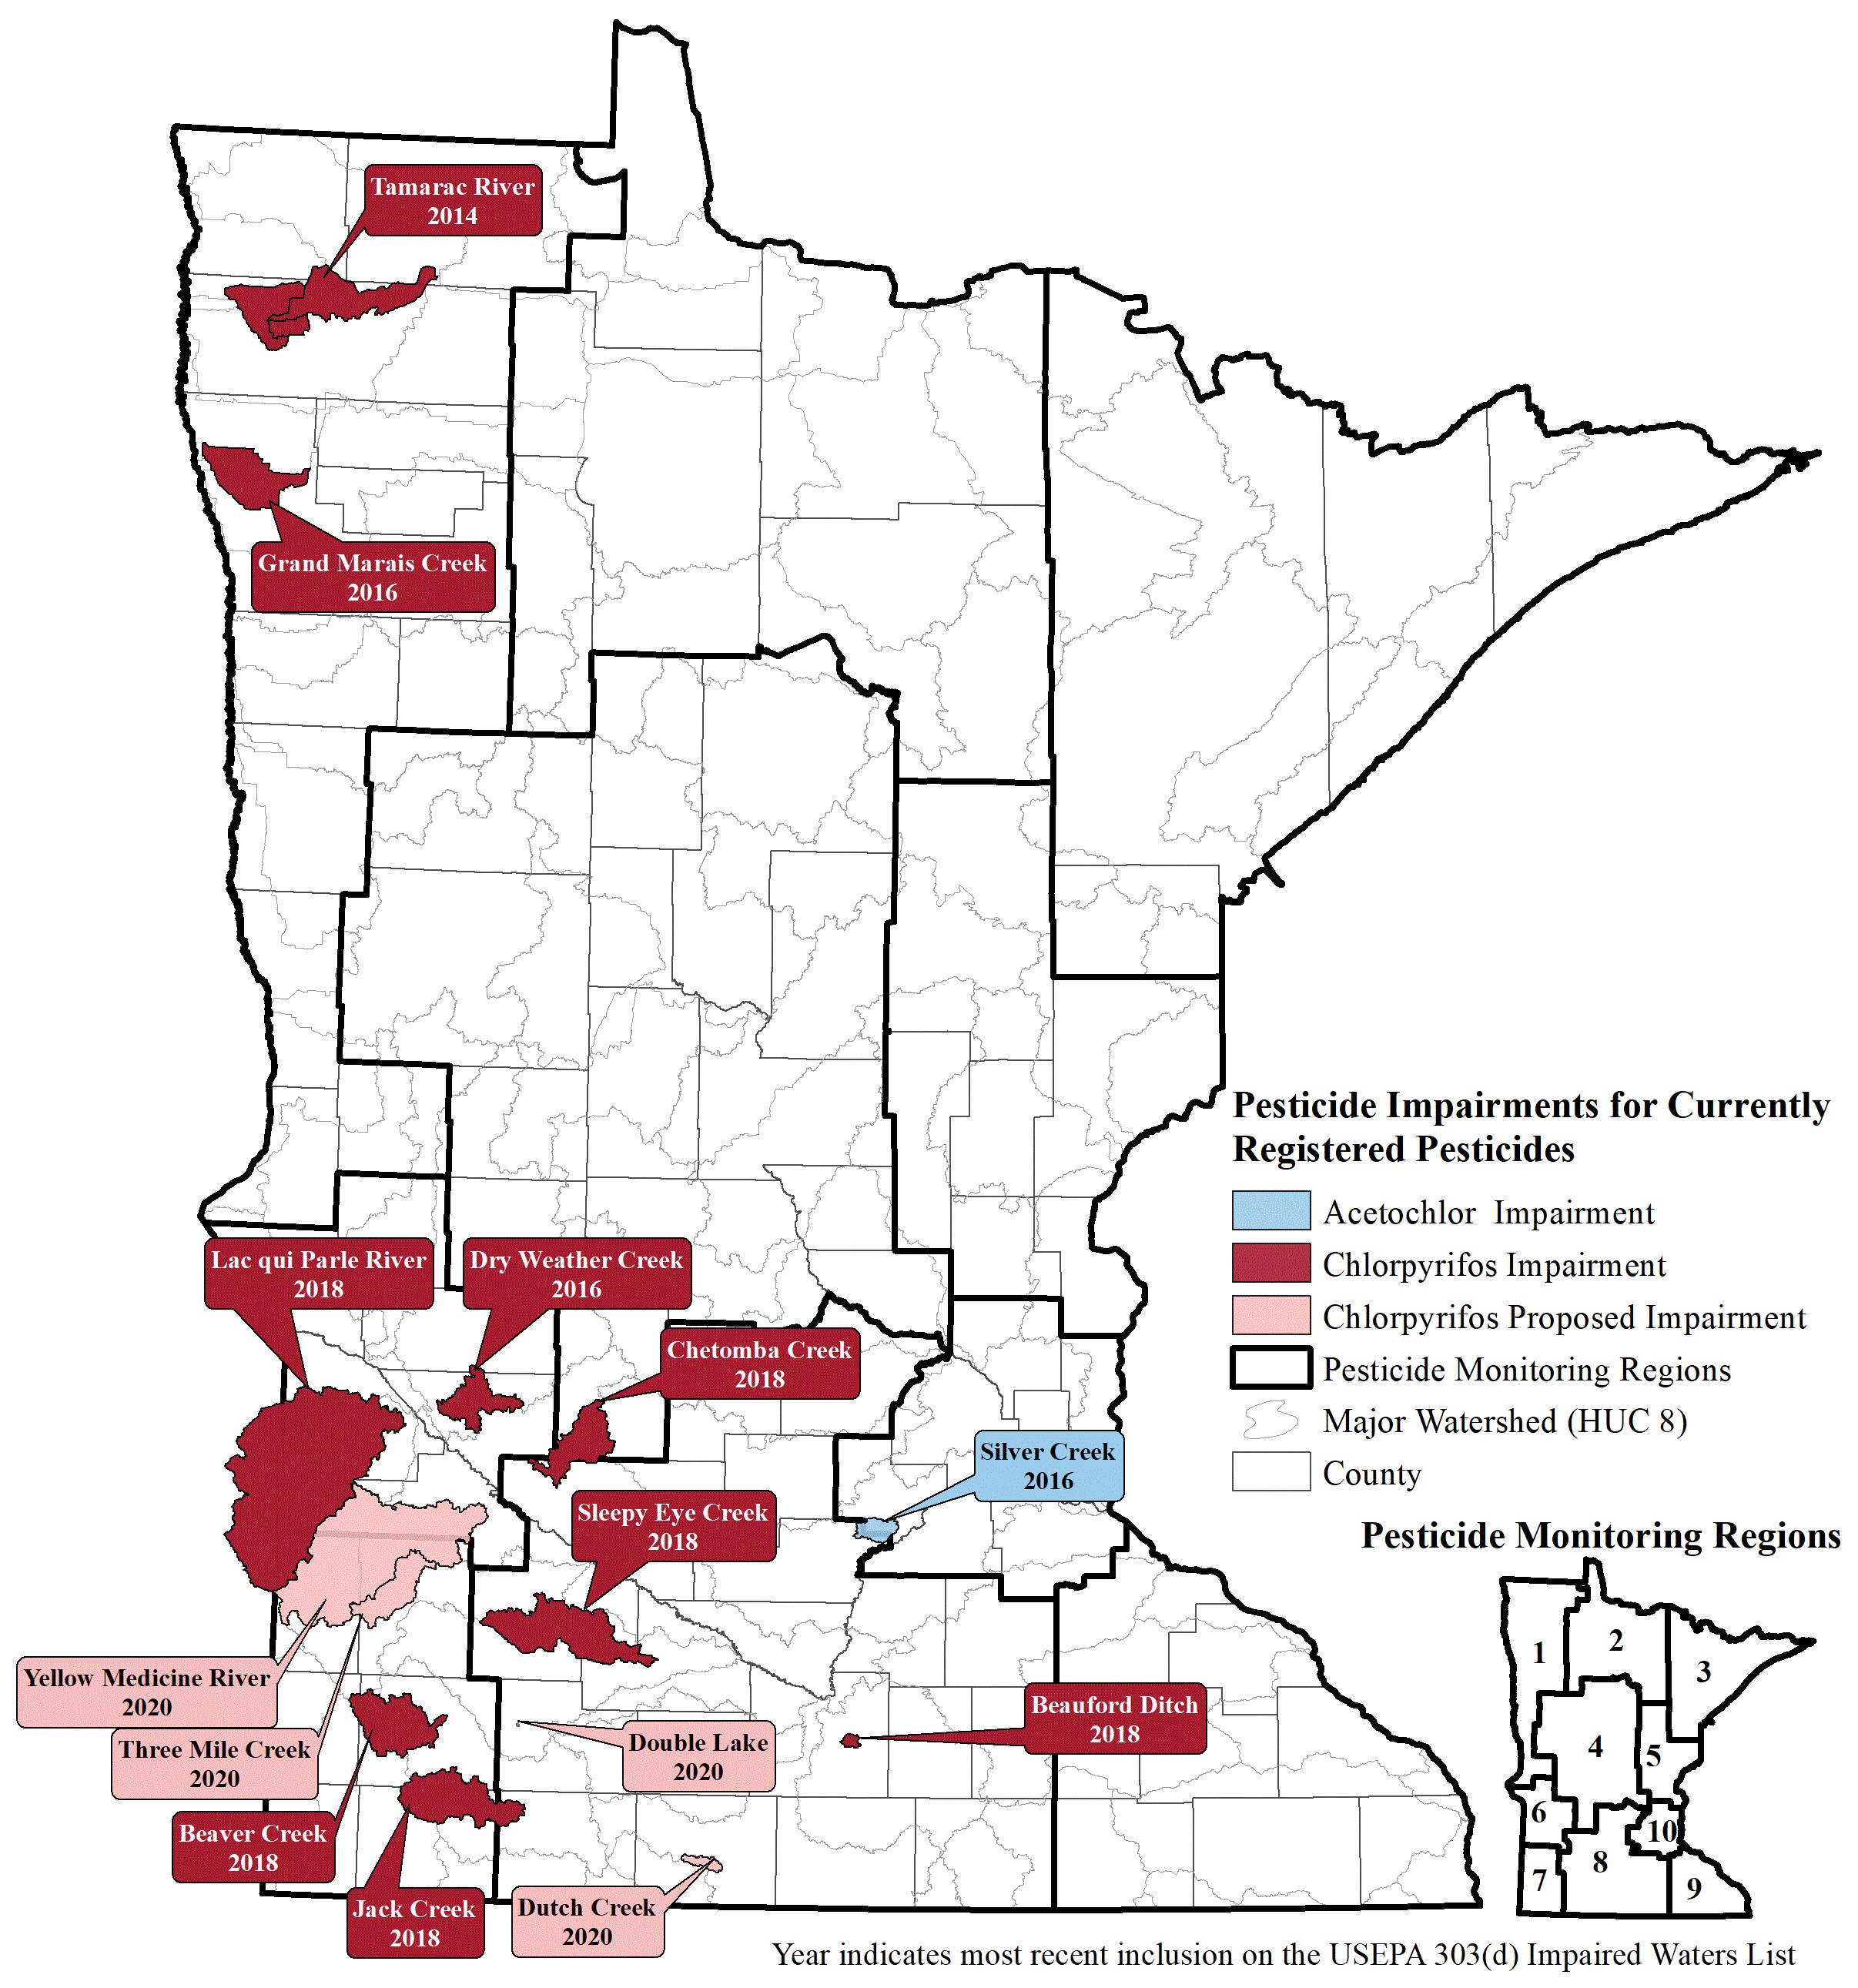 Map of Minnesota illustrating the fourteen waterbodies that are designated as impaired or proposed to be designated by the MPCA. Ten are located in the southwest, 2 in south central, and 2 in the northwest.See Table 1 for more information.